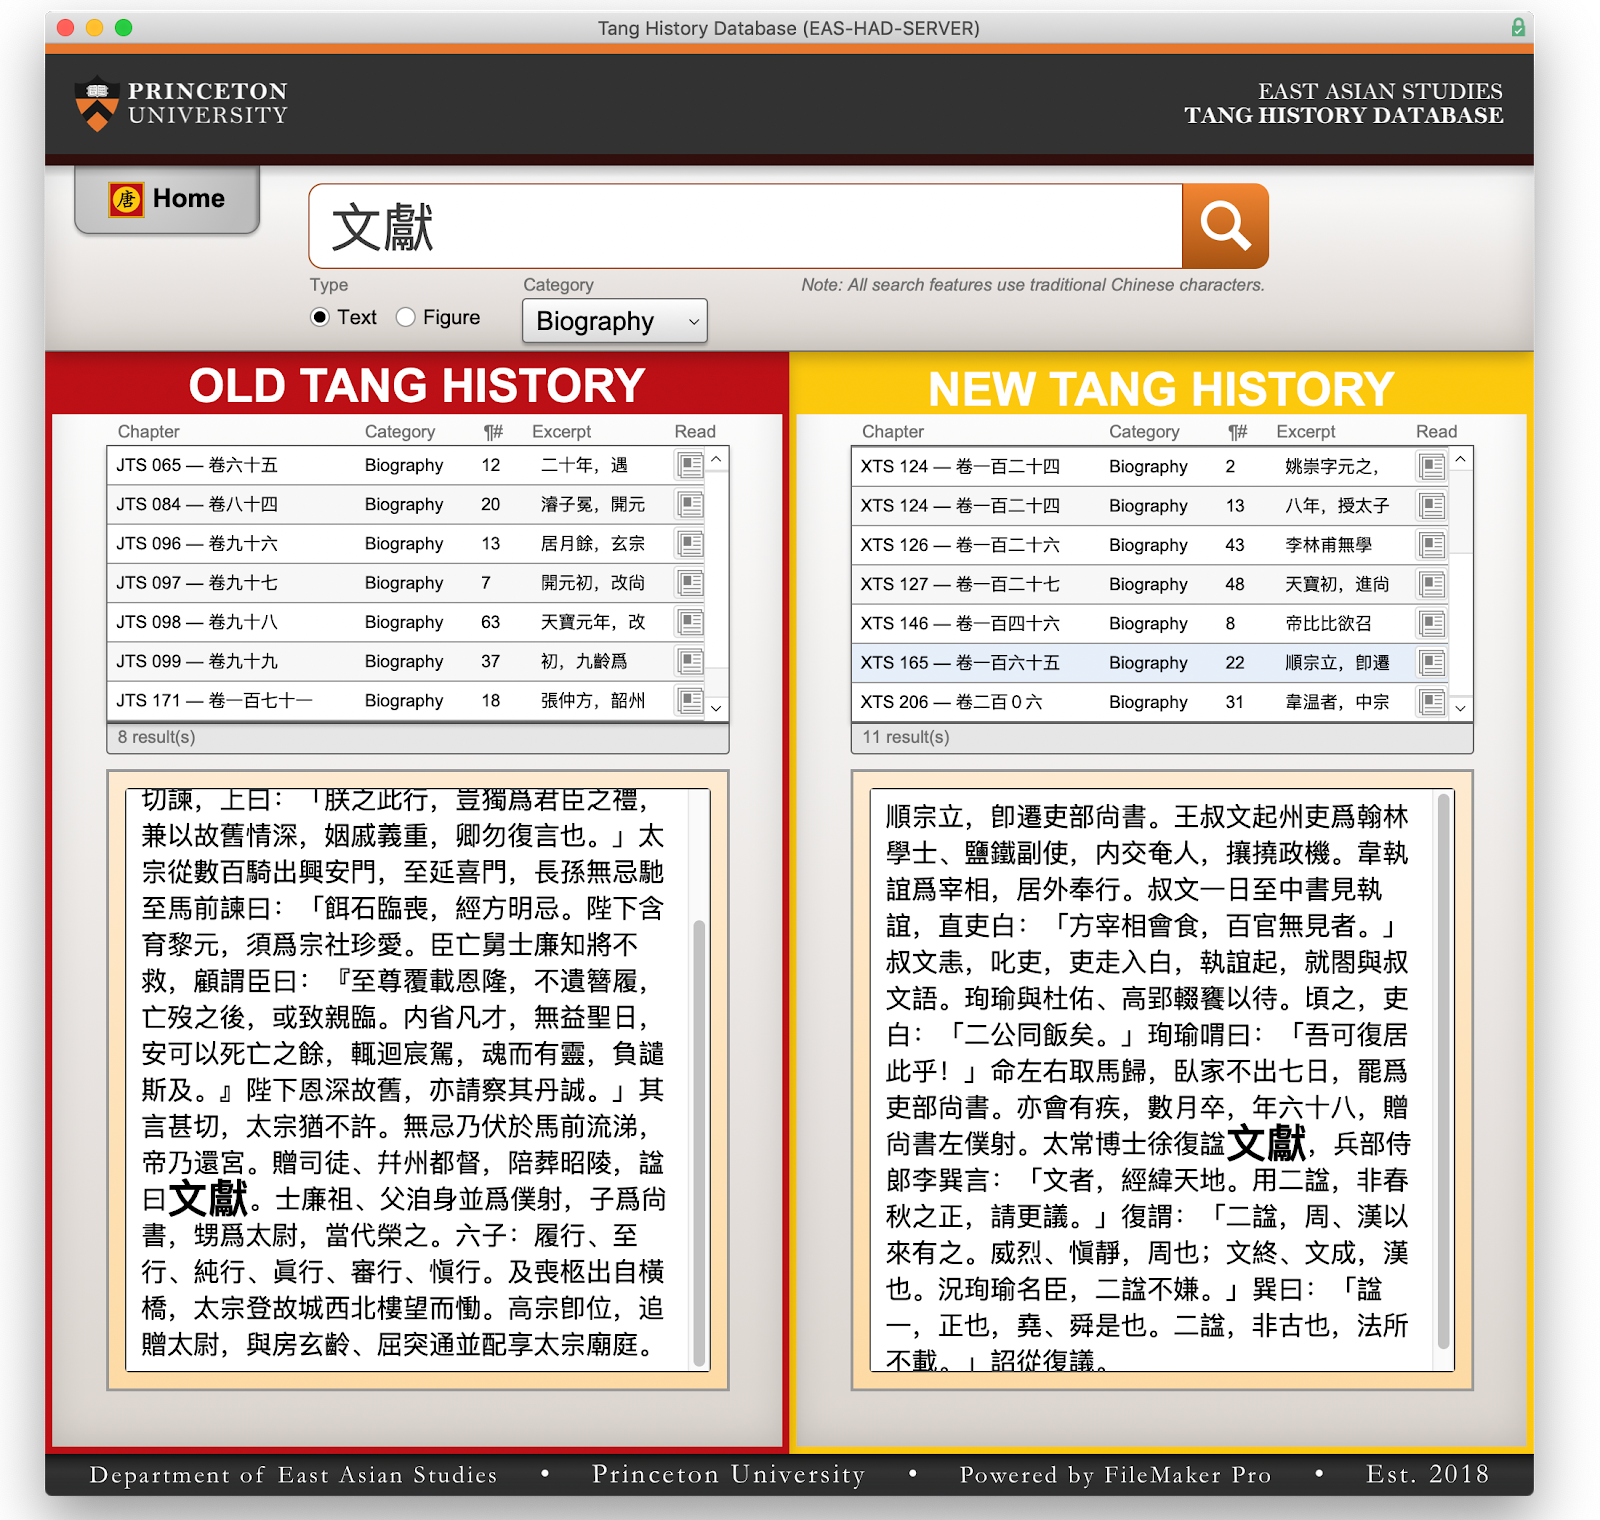 Detail of the Tang History Database interface